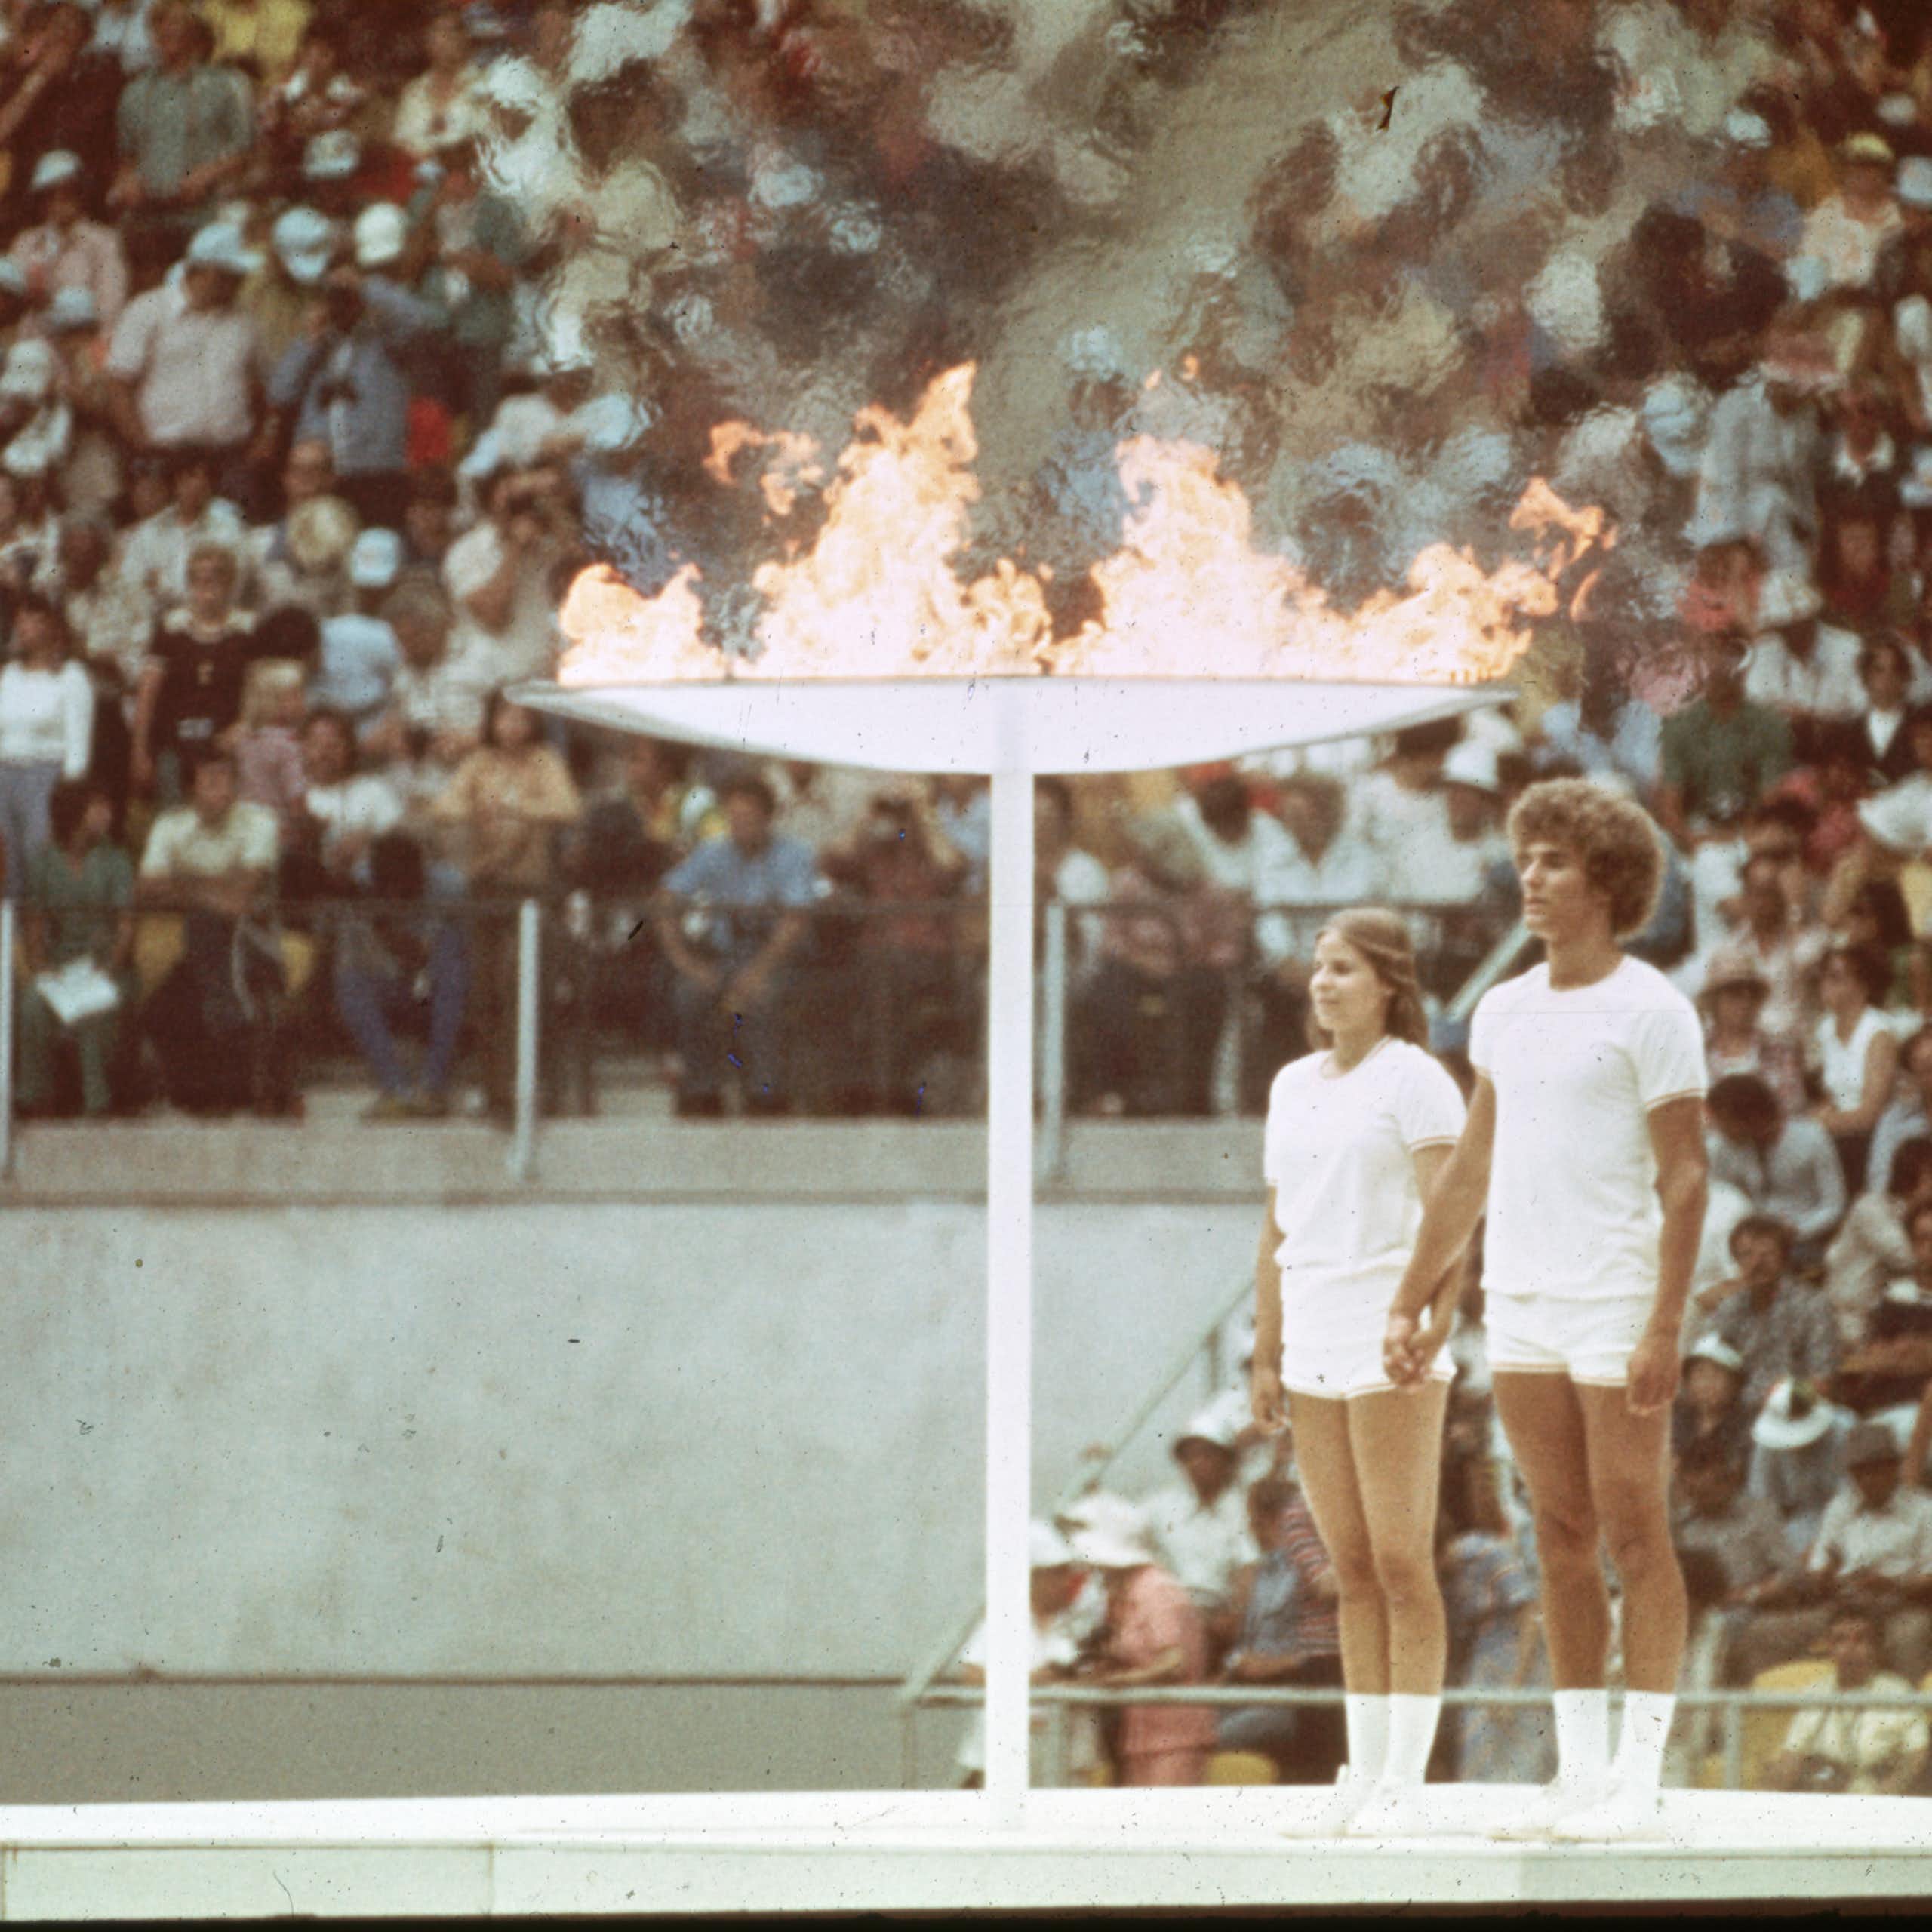 A vintage colour photo of two young people - a man and woman - standing at attention next to a giant torch that is flaming. In the background, packed stands of a stadium.